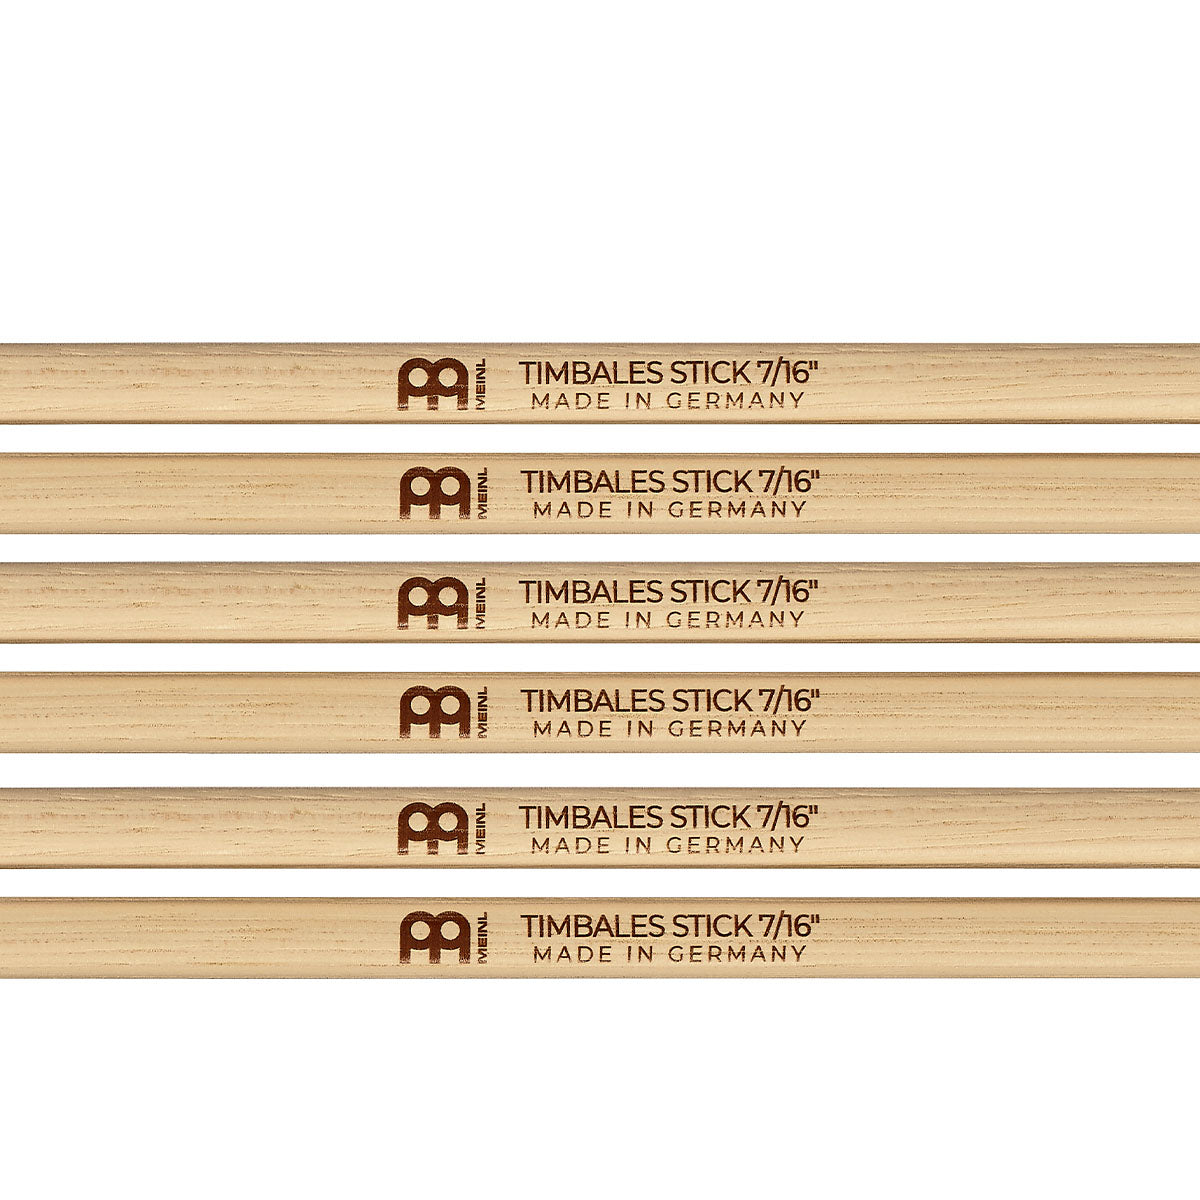 Meinl Timbales Stick 7/16" - 3 Pack